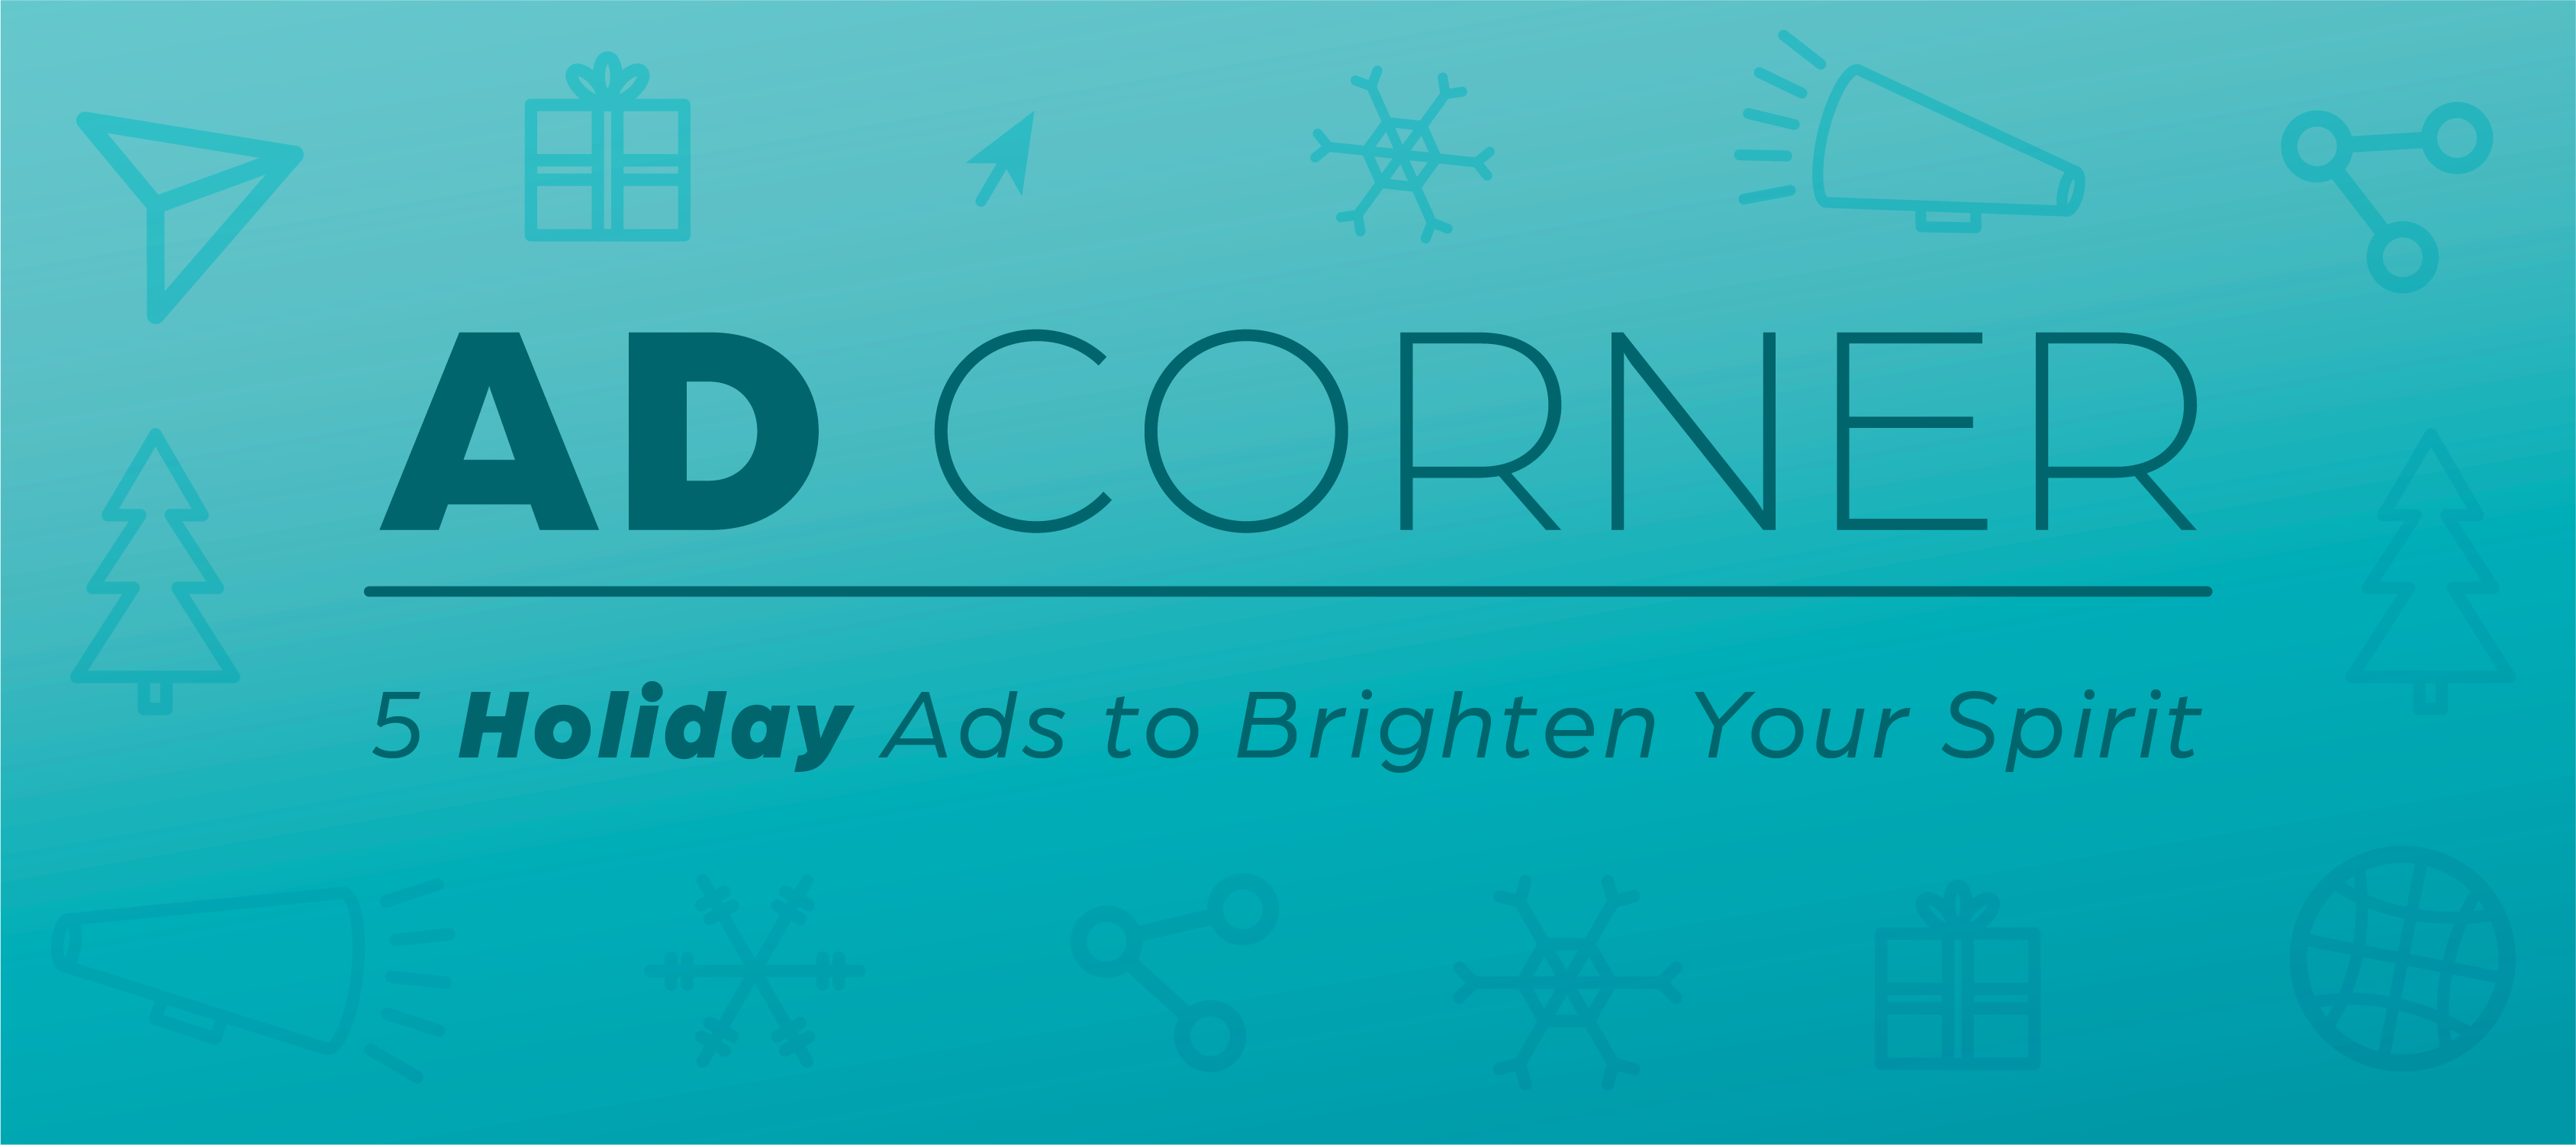 Header image that says "Ad Corner: 5 Holiday Ads to Brighten Your Spirit" surrounded by a mix of holiday and marketing icons